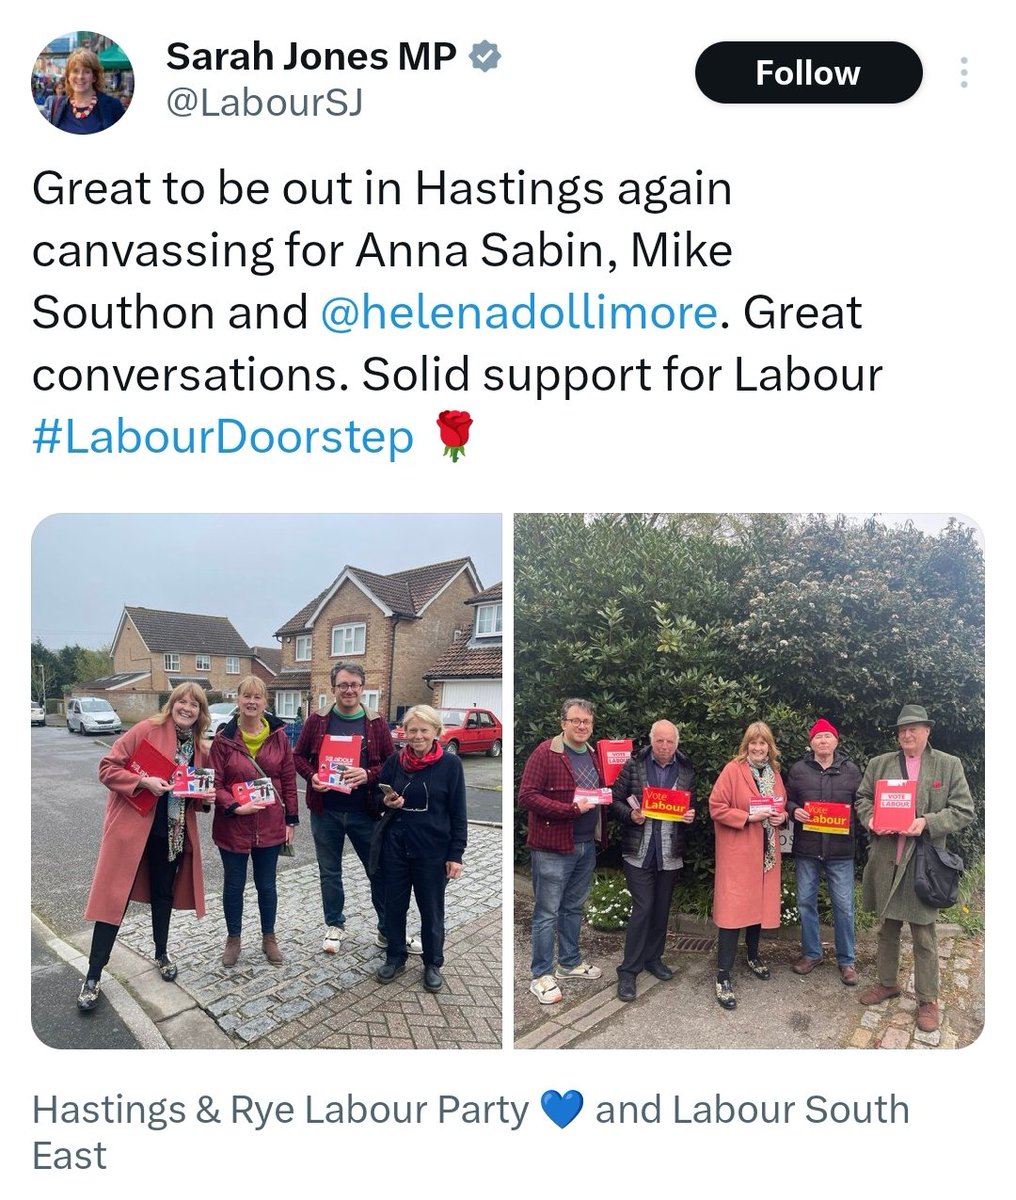 Croydon MP out canvassing for #WheresHelena with a misogynistic councillor who was deselected in 2019 for aggressive behaviour by the party, now has had to post an apology again this week on the Labour Party page for further 'regrettable comments'. The party is keeping him as a